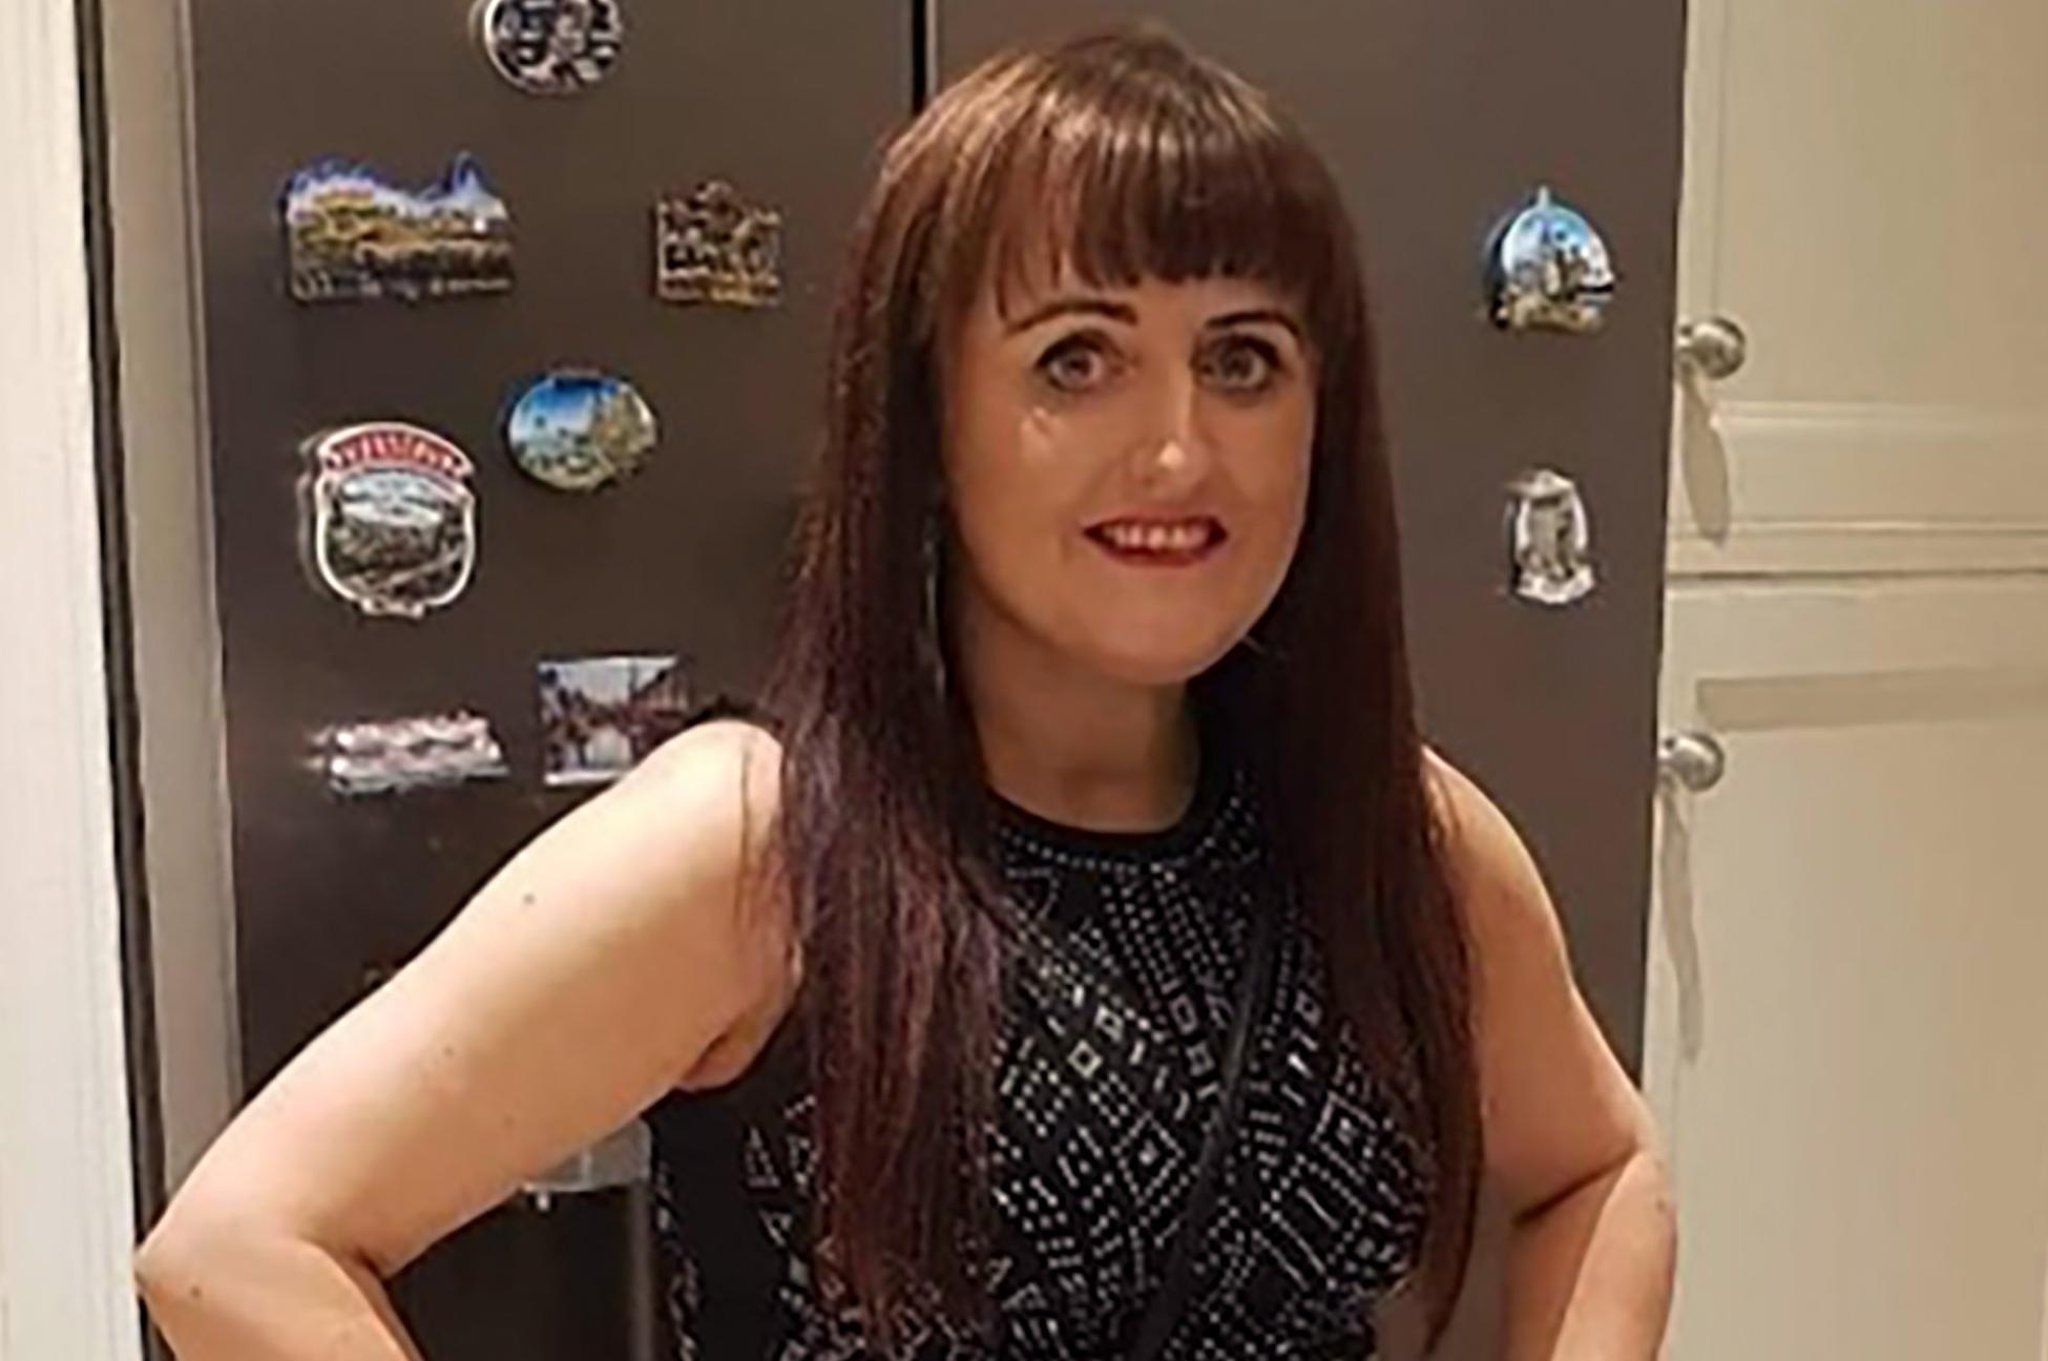 Tributes continue to pour in for 'lovely and gentle' Jody Keenan who died on Newry street